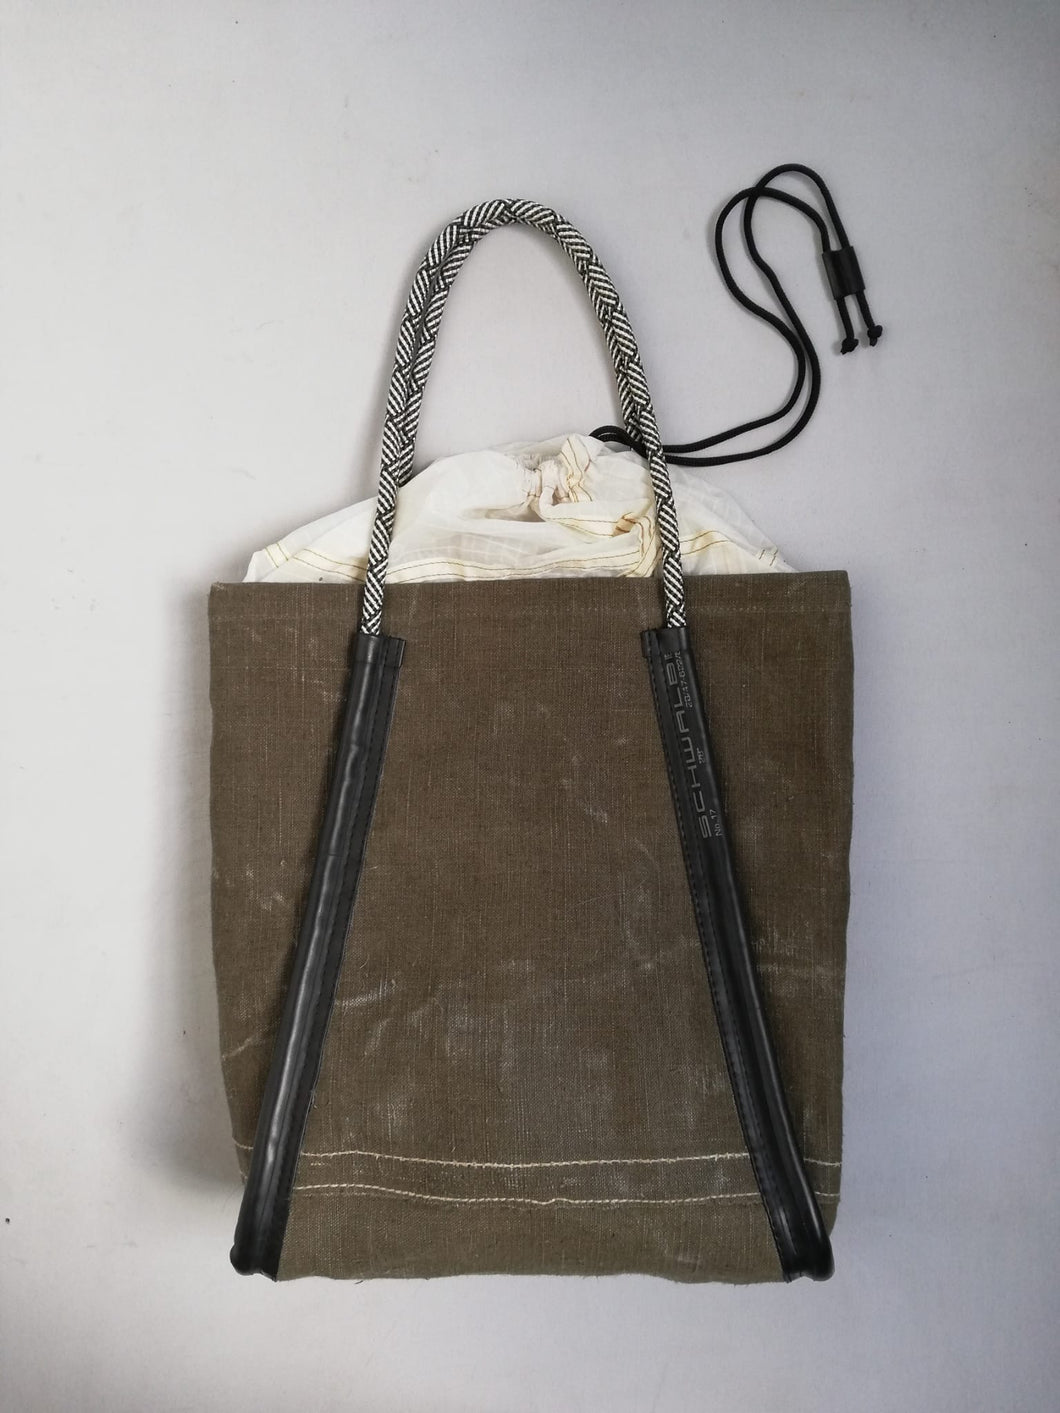 Handmade shopping bag from recycled military canvas, parachute and bicycle innertube. designed by Anne van Dijk